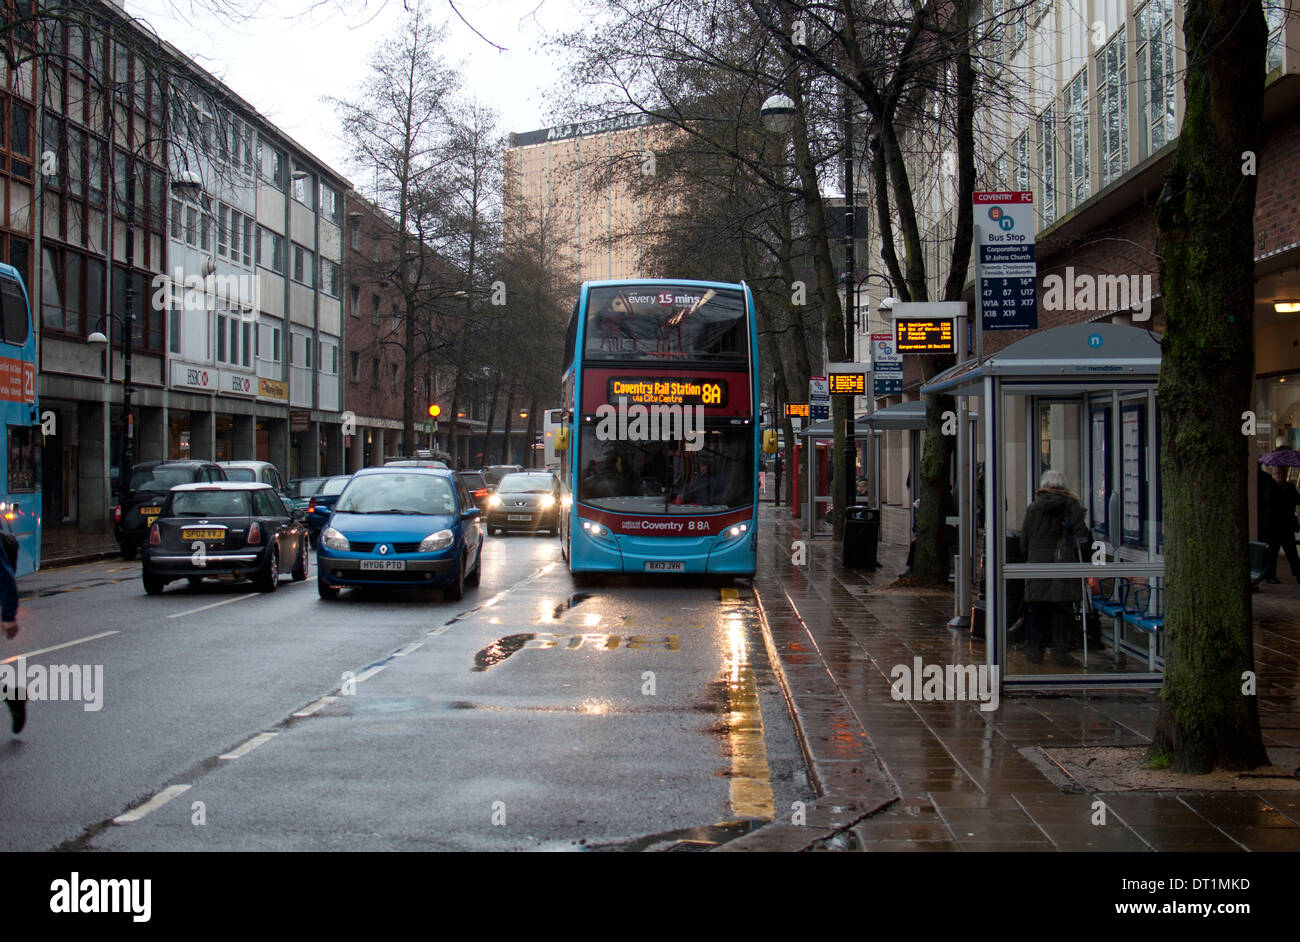 Bus in wet weather, Coventry city centre, UK Stock Photo